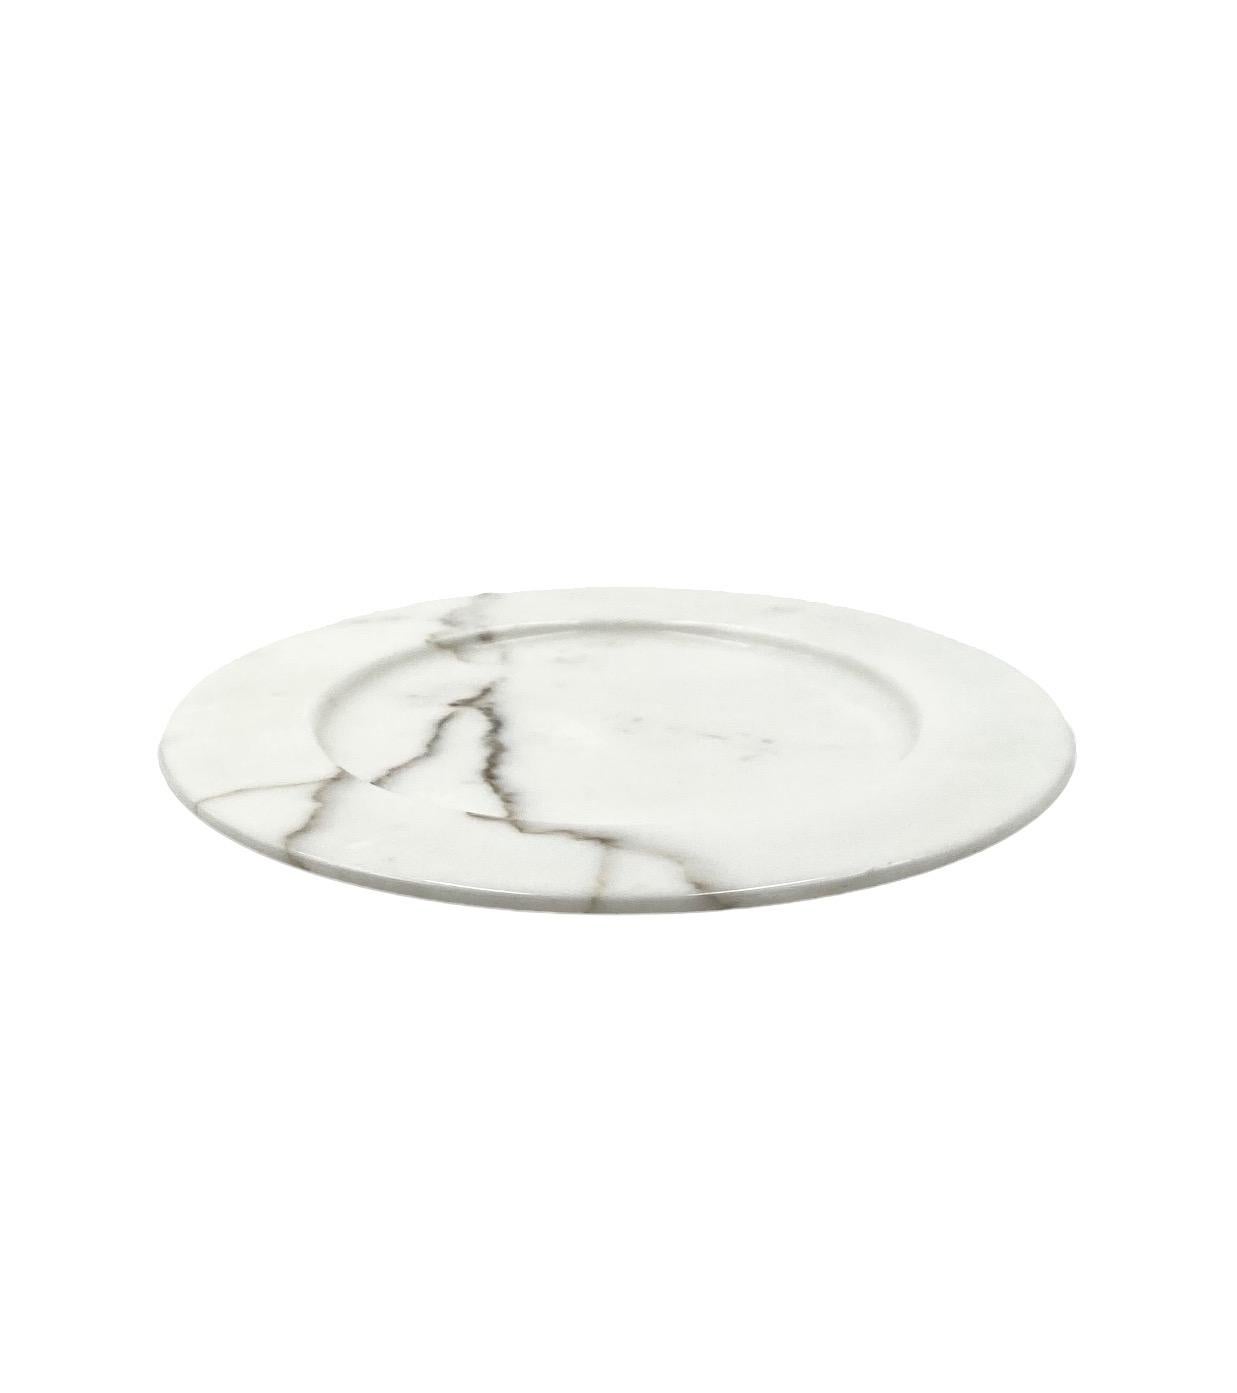 White Carrara marble centerpiece / plate, Up&Up Italy, 1970s For Sale 2